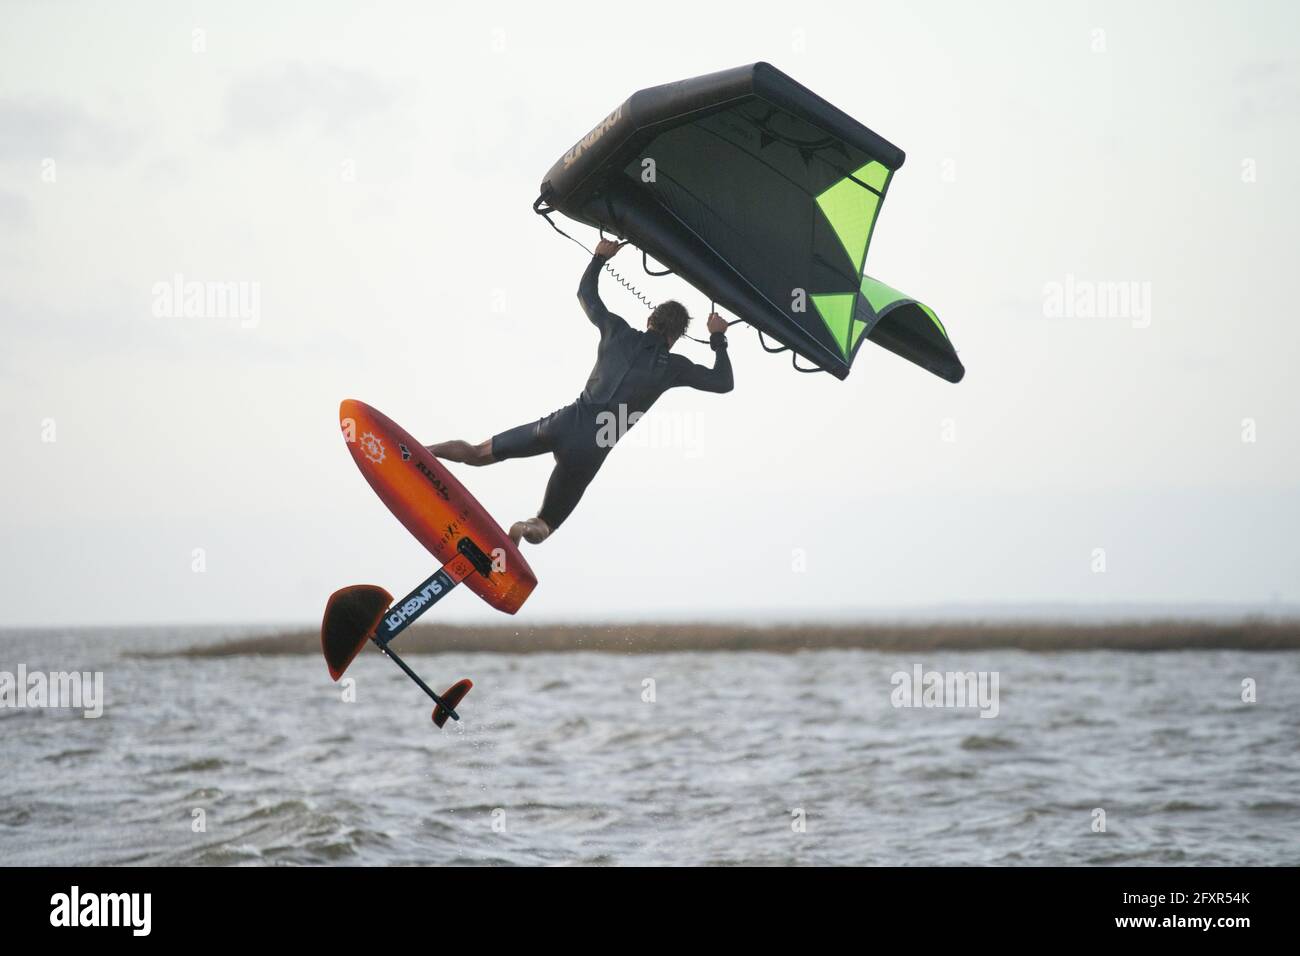 Pro surfer James Jenkins jumps his wing surfer over the Pamlico Sound at Nags Head, North Carolina, United States of America, North America Stock Photo